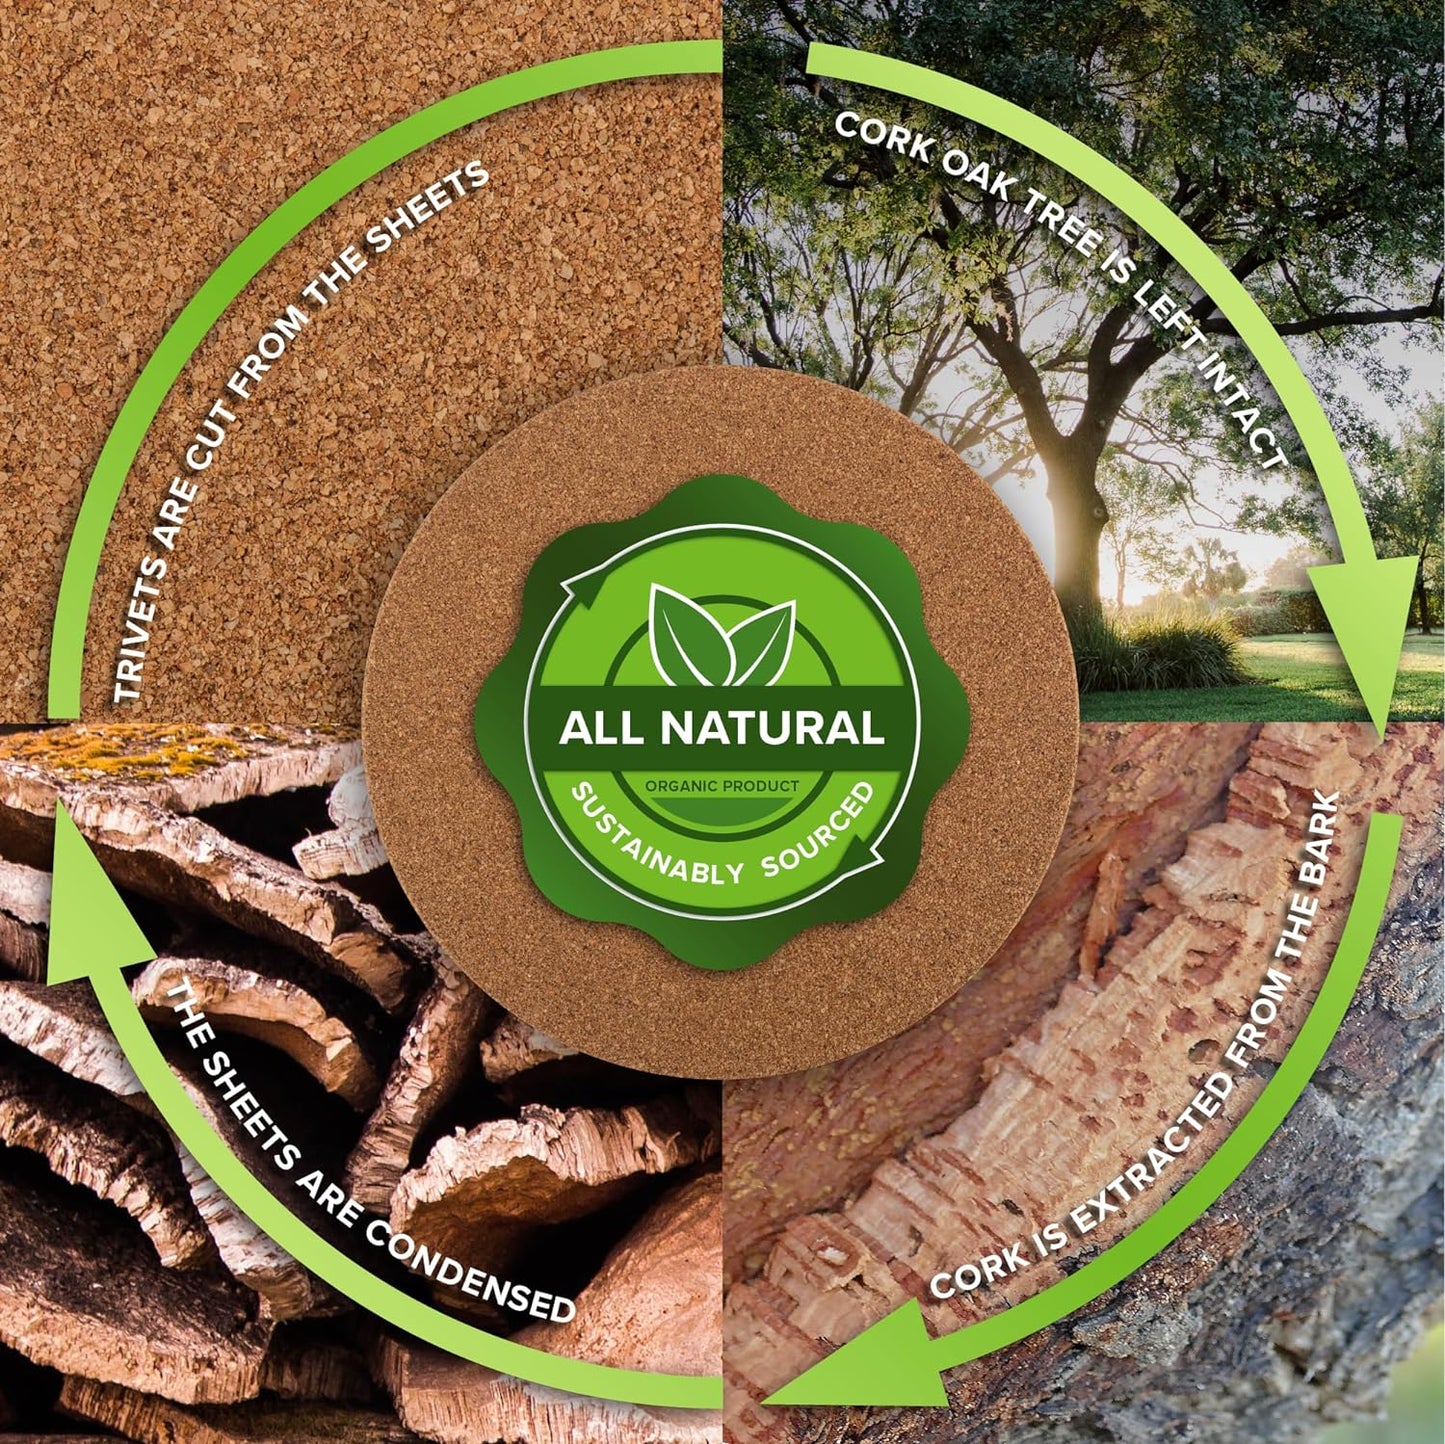 a collage of images of trees and bark with text: 'CORK OAK TREE IS LEFT INTACT TRIVETS ARE CUT FROM THE SHEETS ALL NATURAL ORGANIC PRODUCT SUSTAINABLY SOURCED THE SHEETS ARE CONDENSED CORK IS EXTRACTED FROM THE'